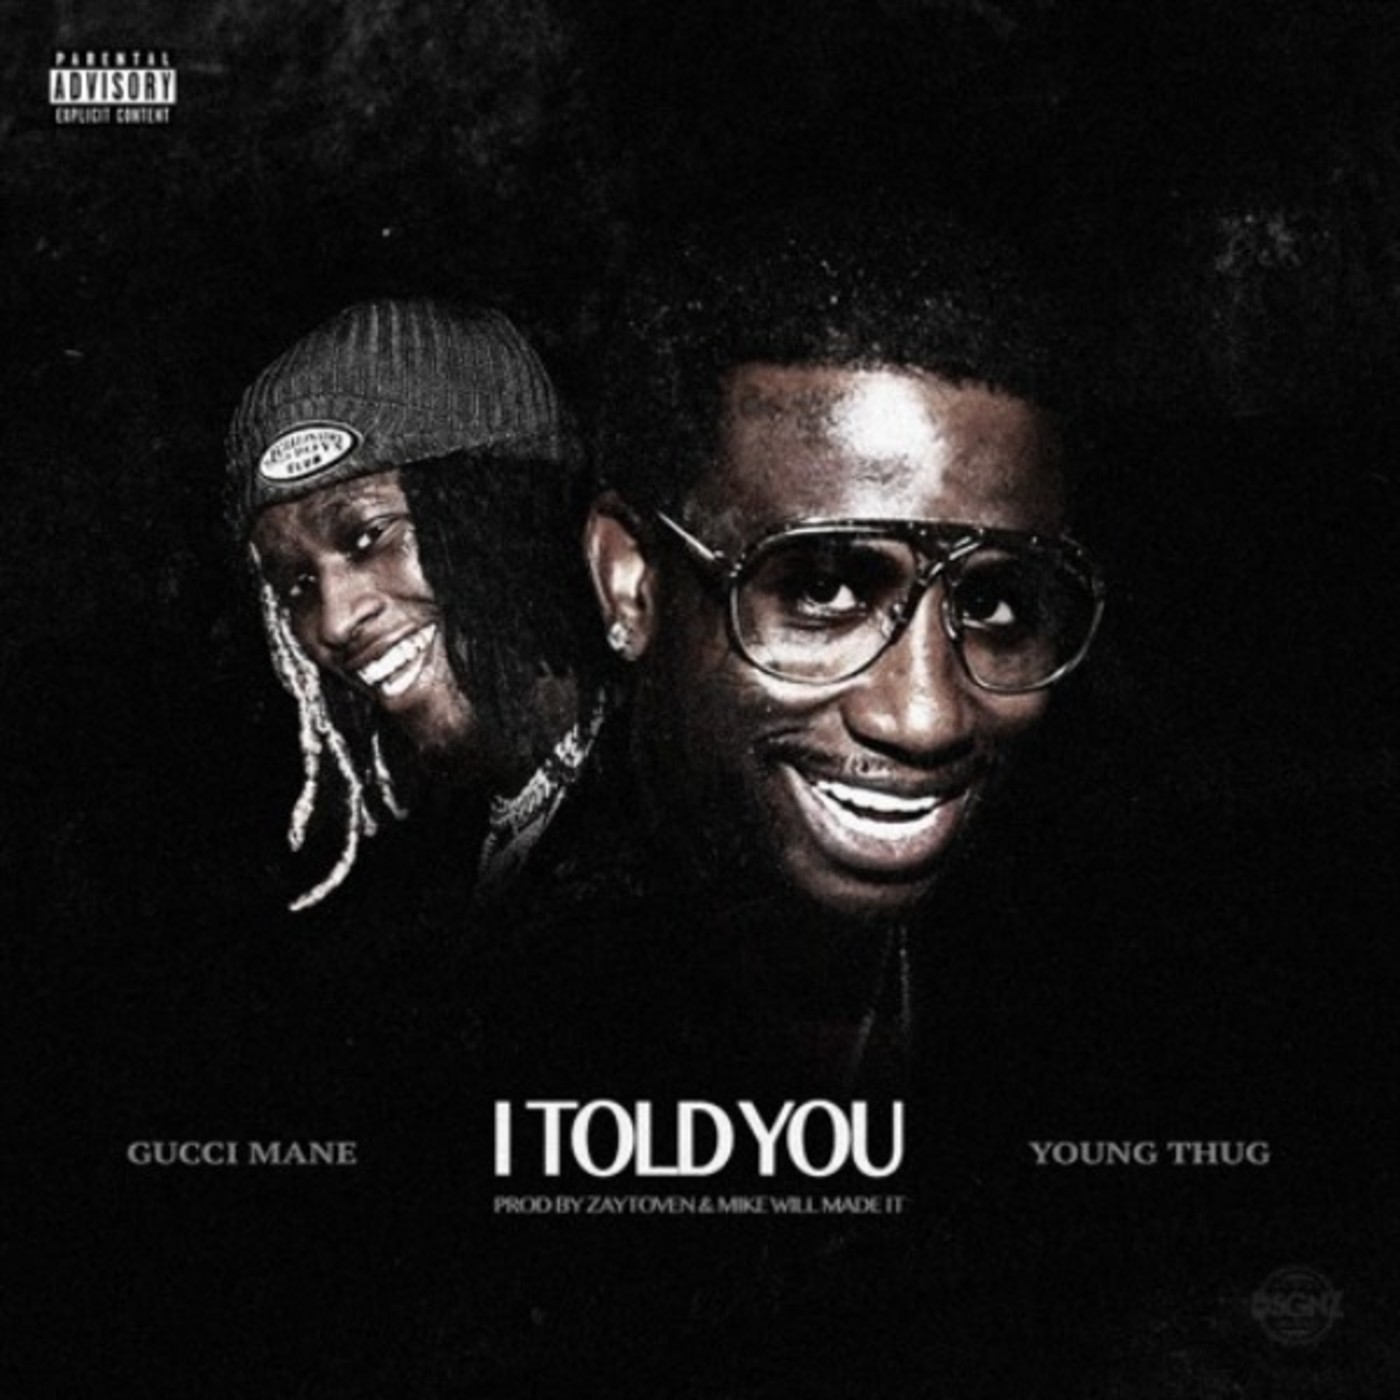 Gucci Mane and Young Rep Atlanta on “I Told You” | Complex